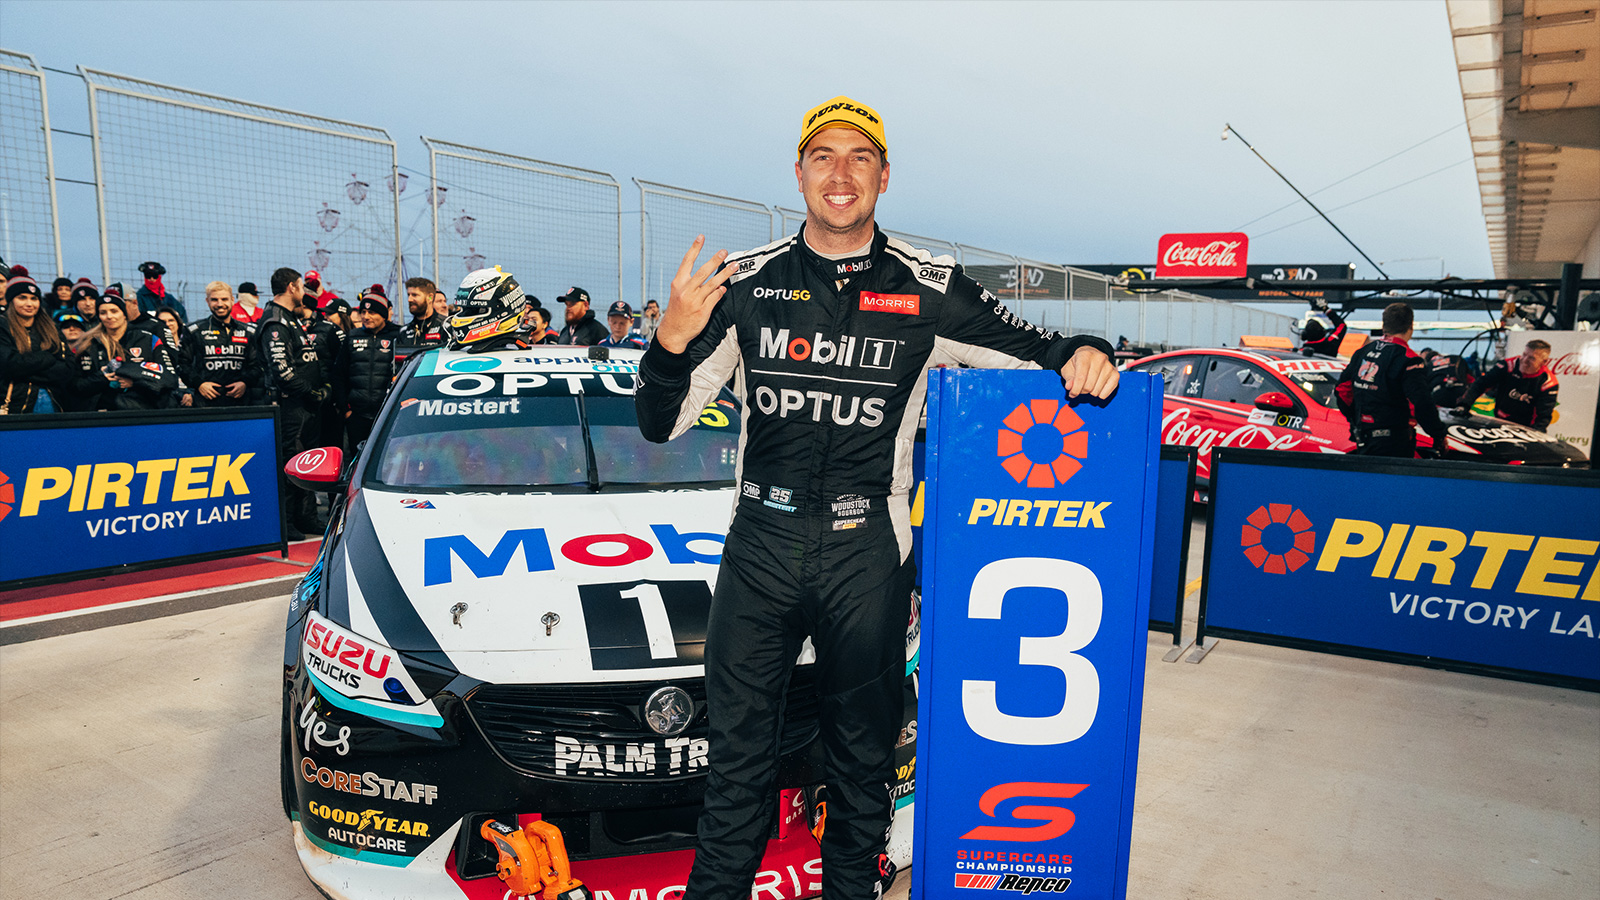 Mostert collected his sixth podium of the season.